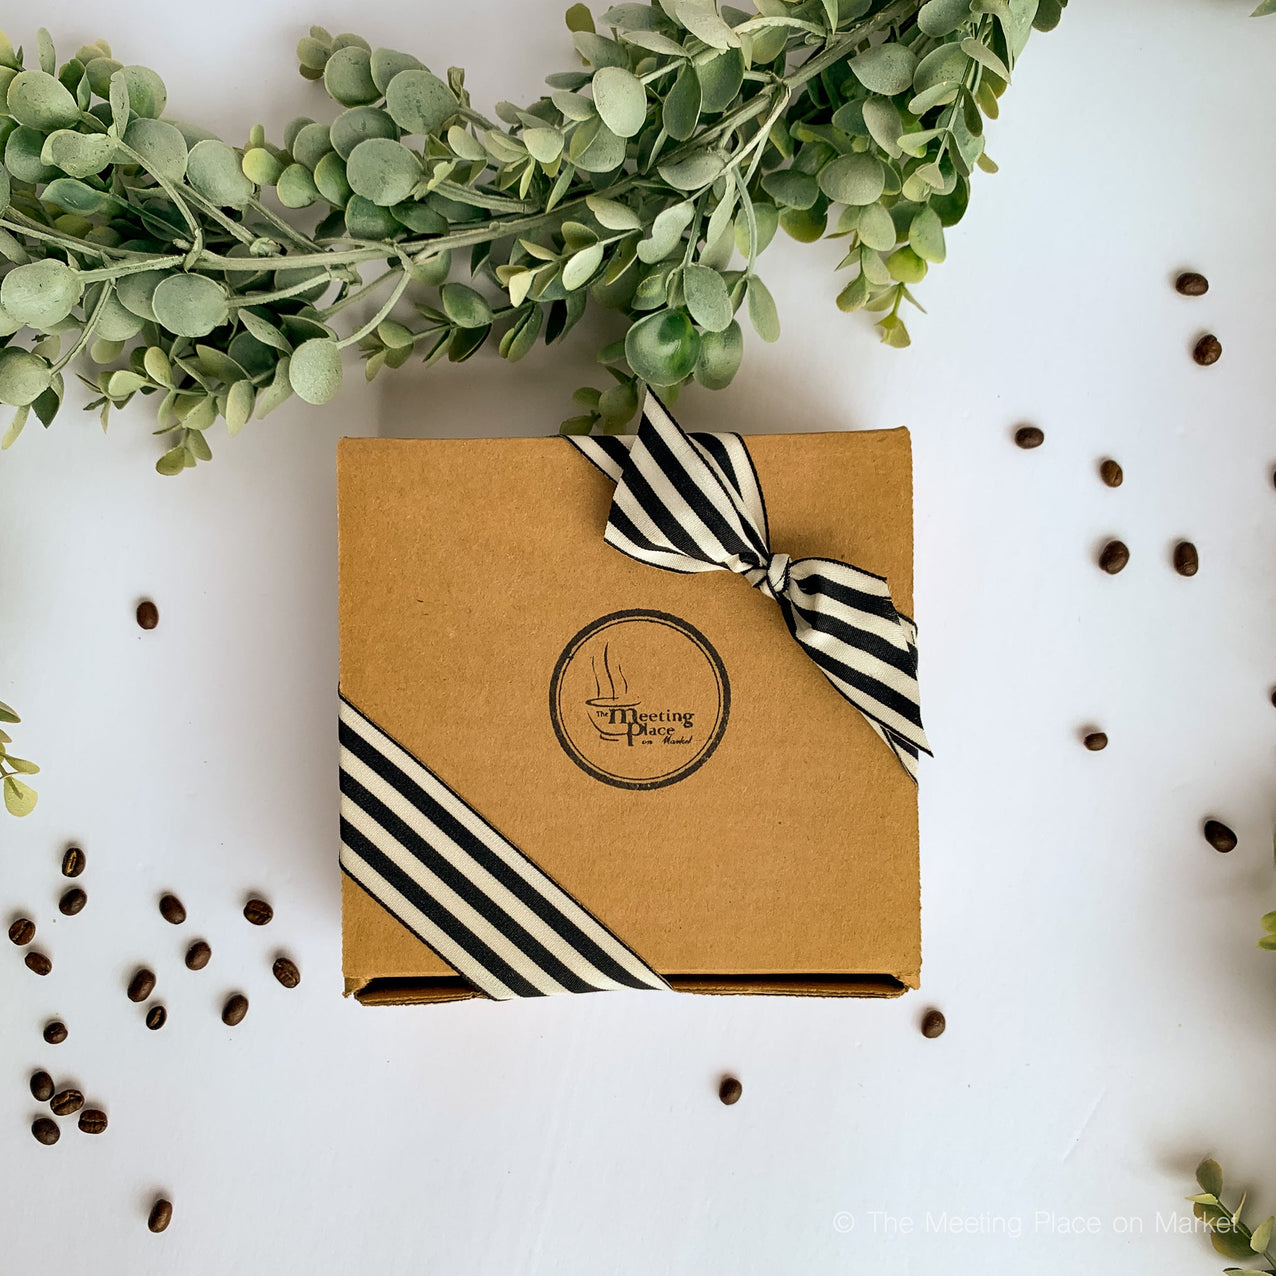 Coffee, Hot Chocolate and Tea Gift Box Thank You Gift Basket - The Meeting Place on Market